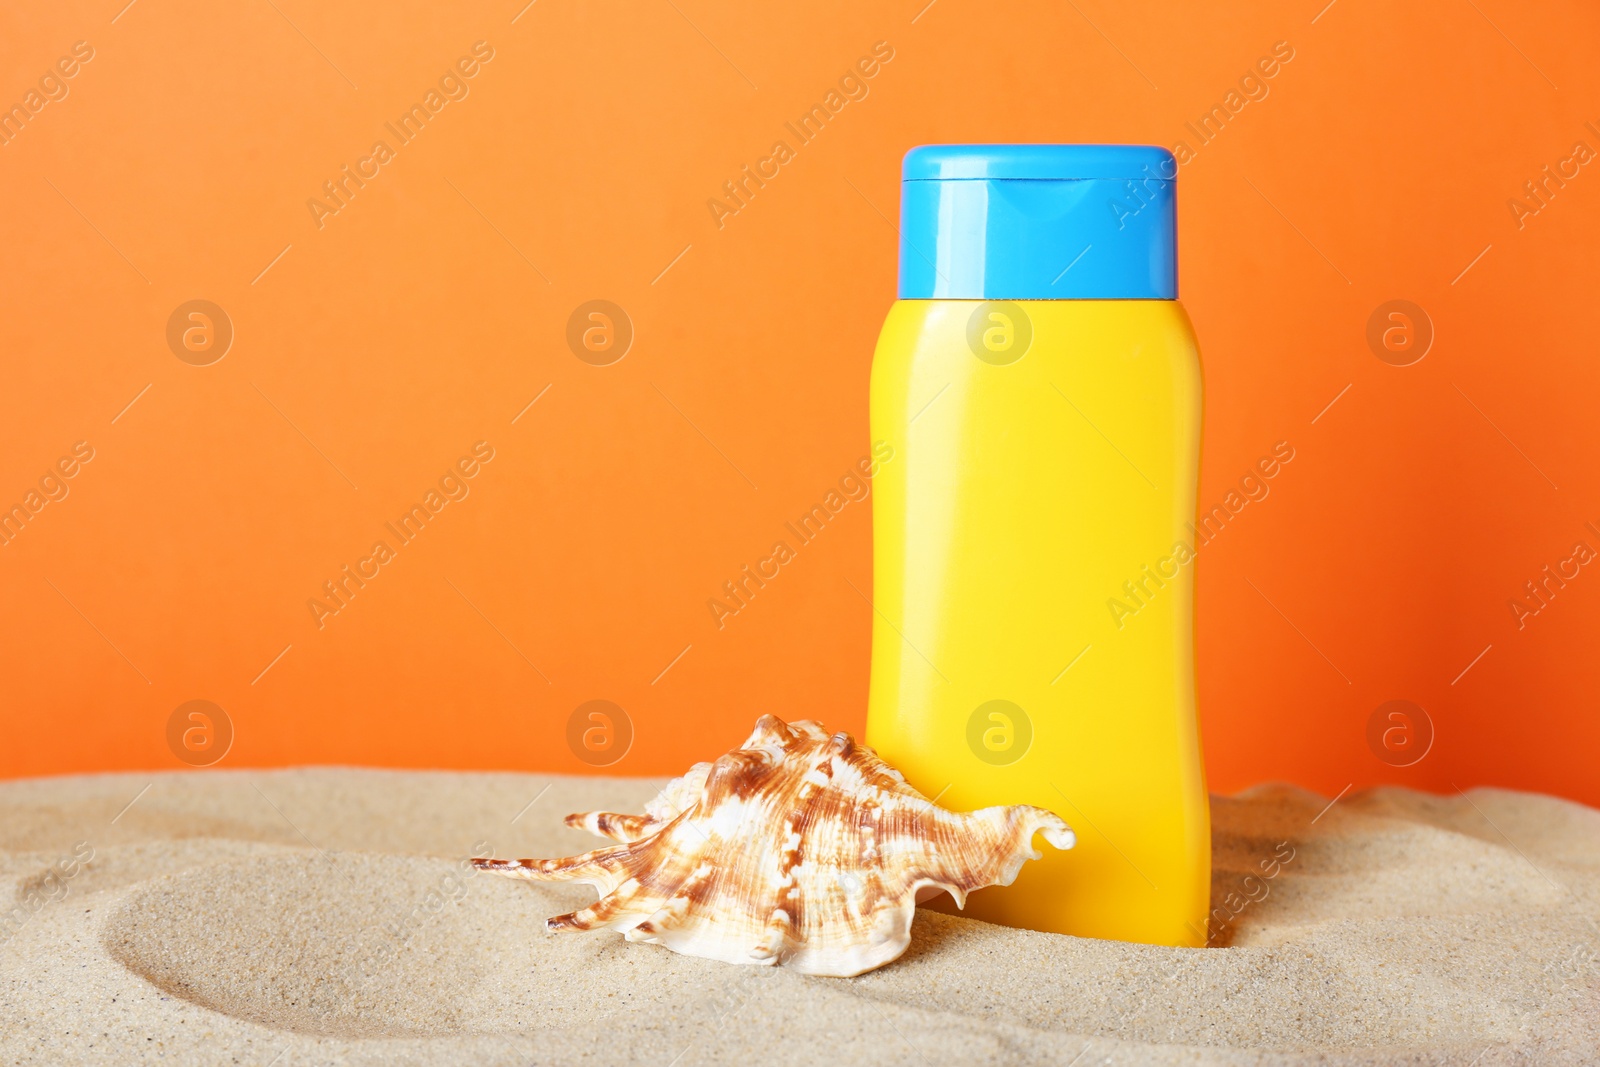 Photo of Suntan product and starfish on sand against orange background. Space for text